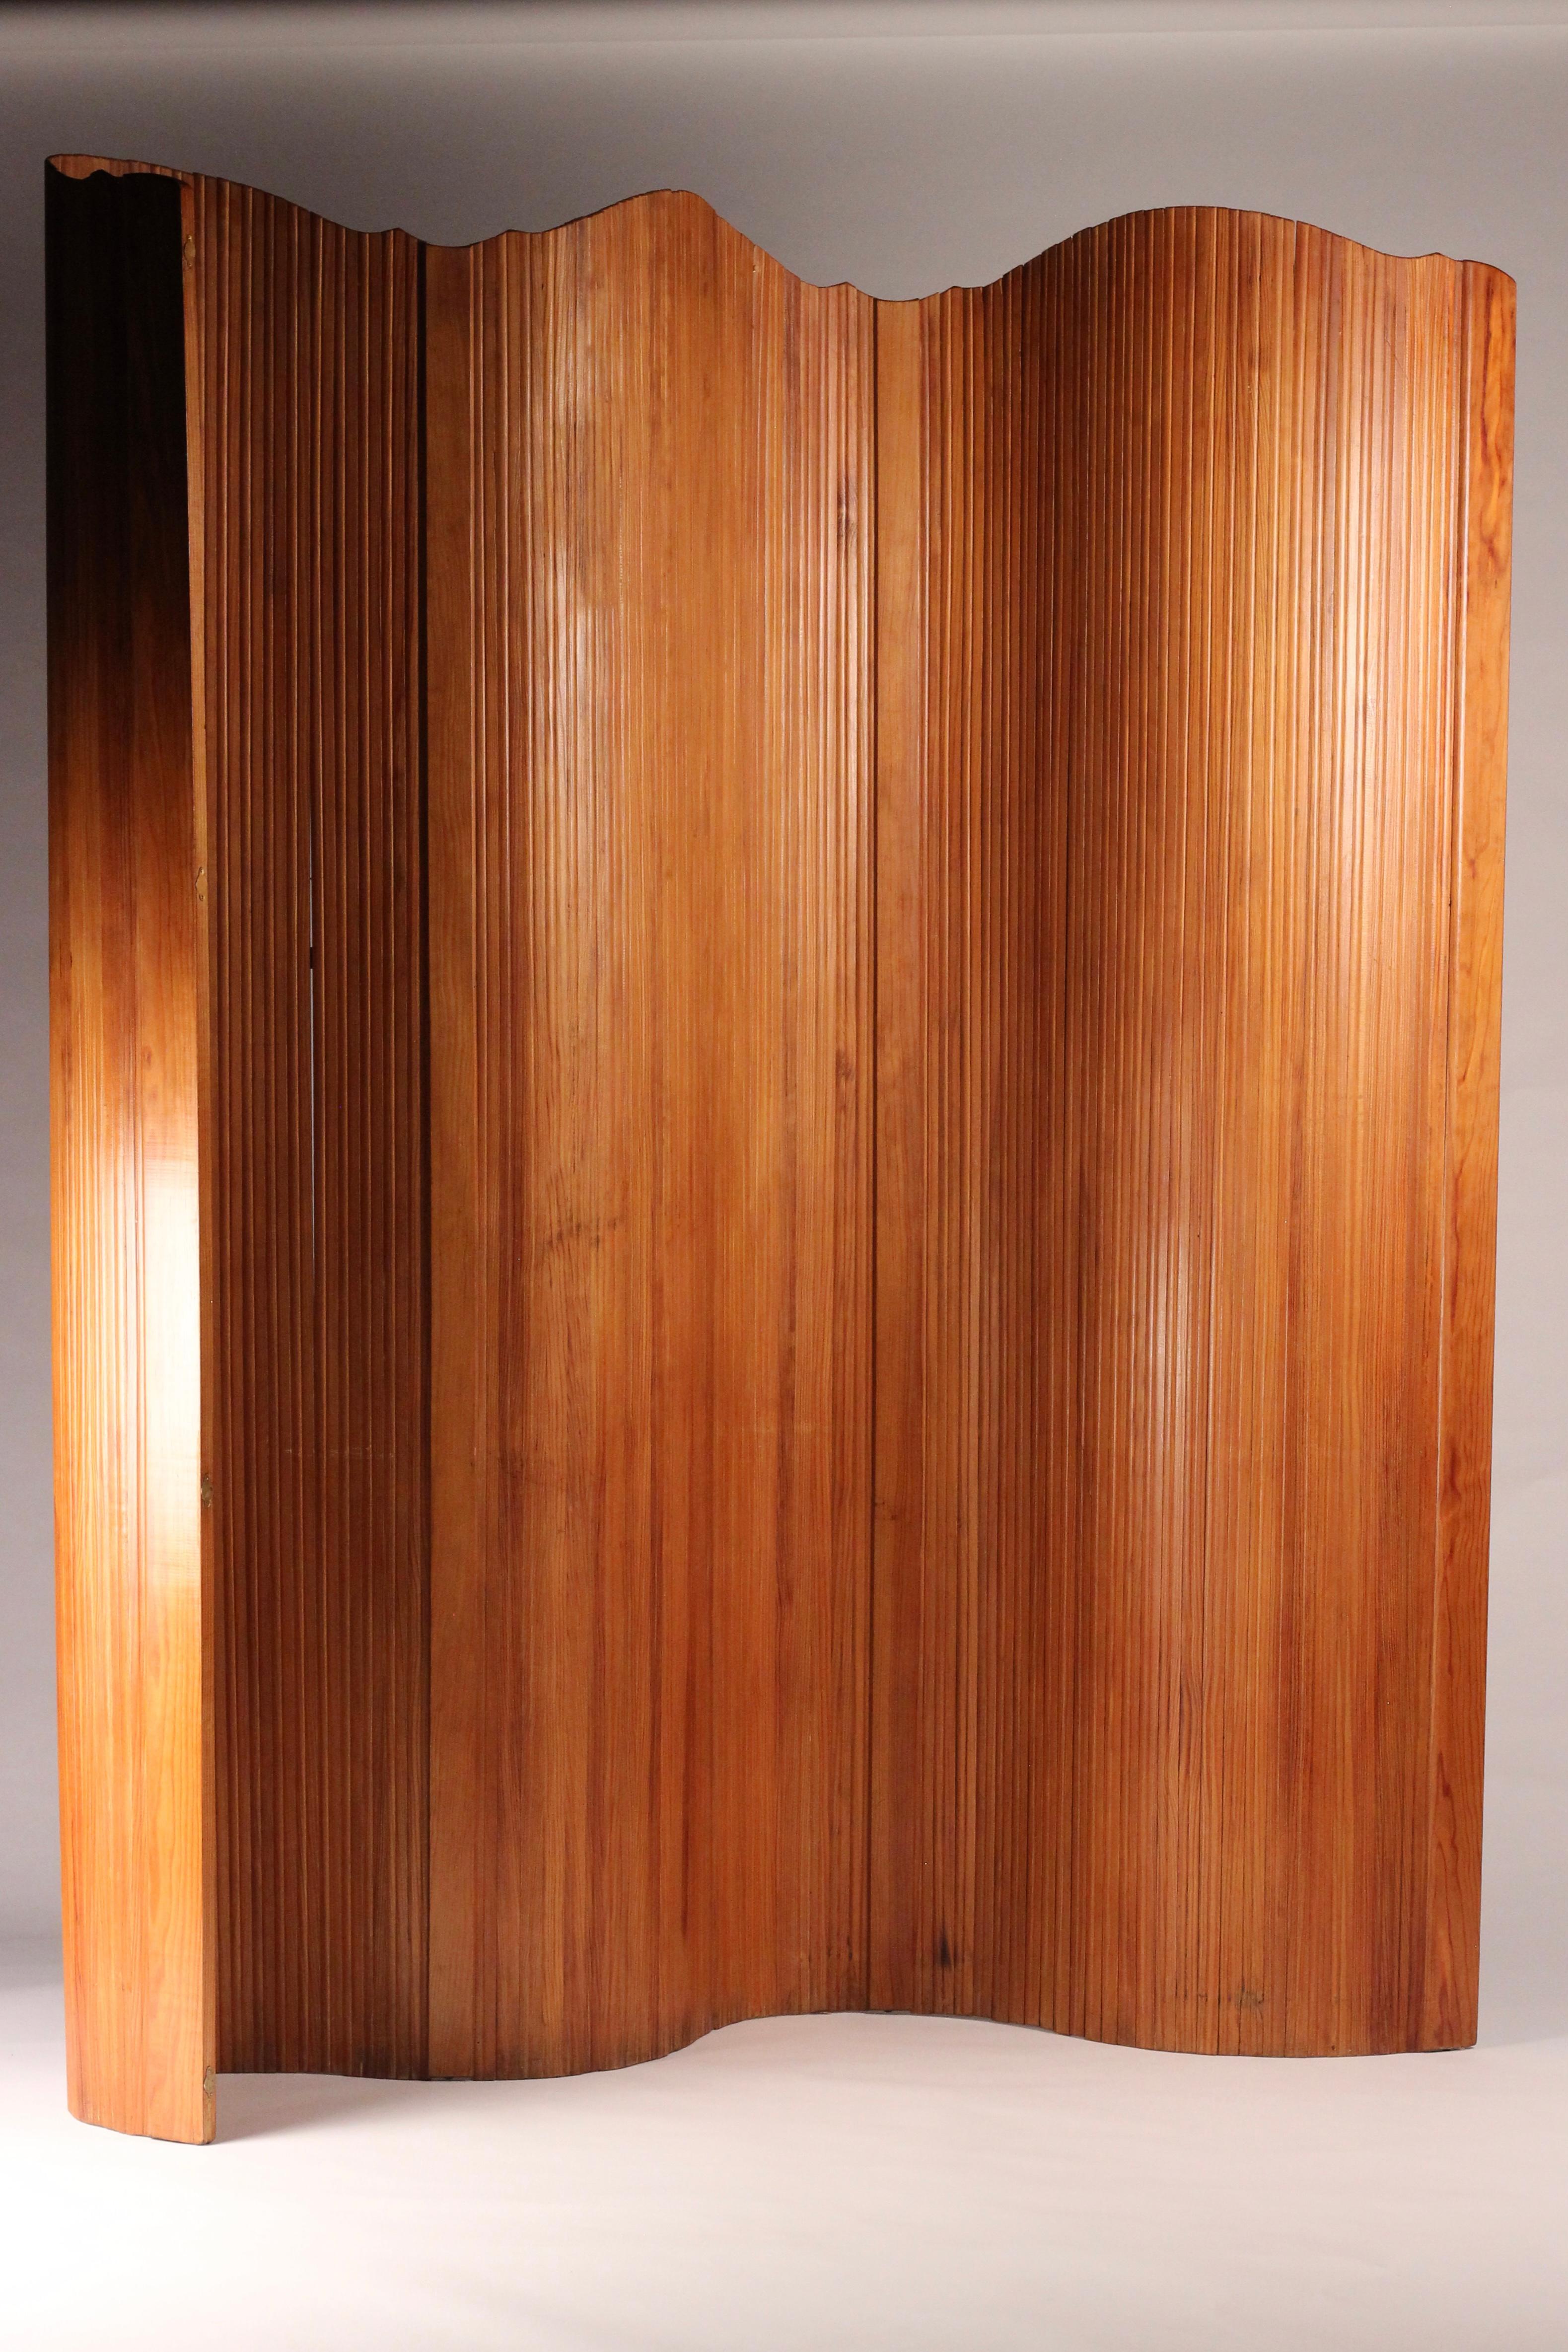 French Art Deco tambour screen room divider in Pine 1930’s attributed Baumman 10